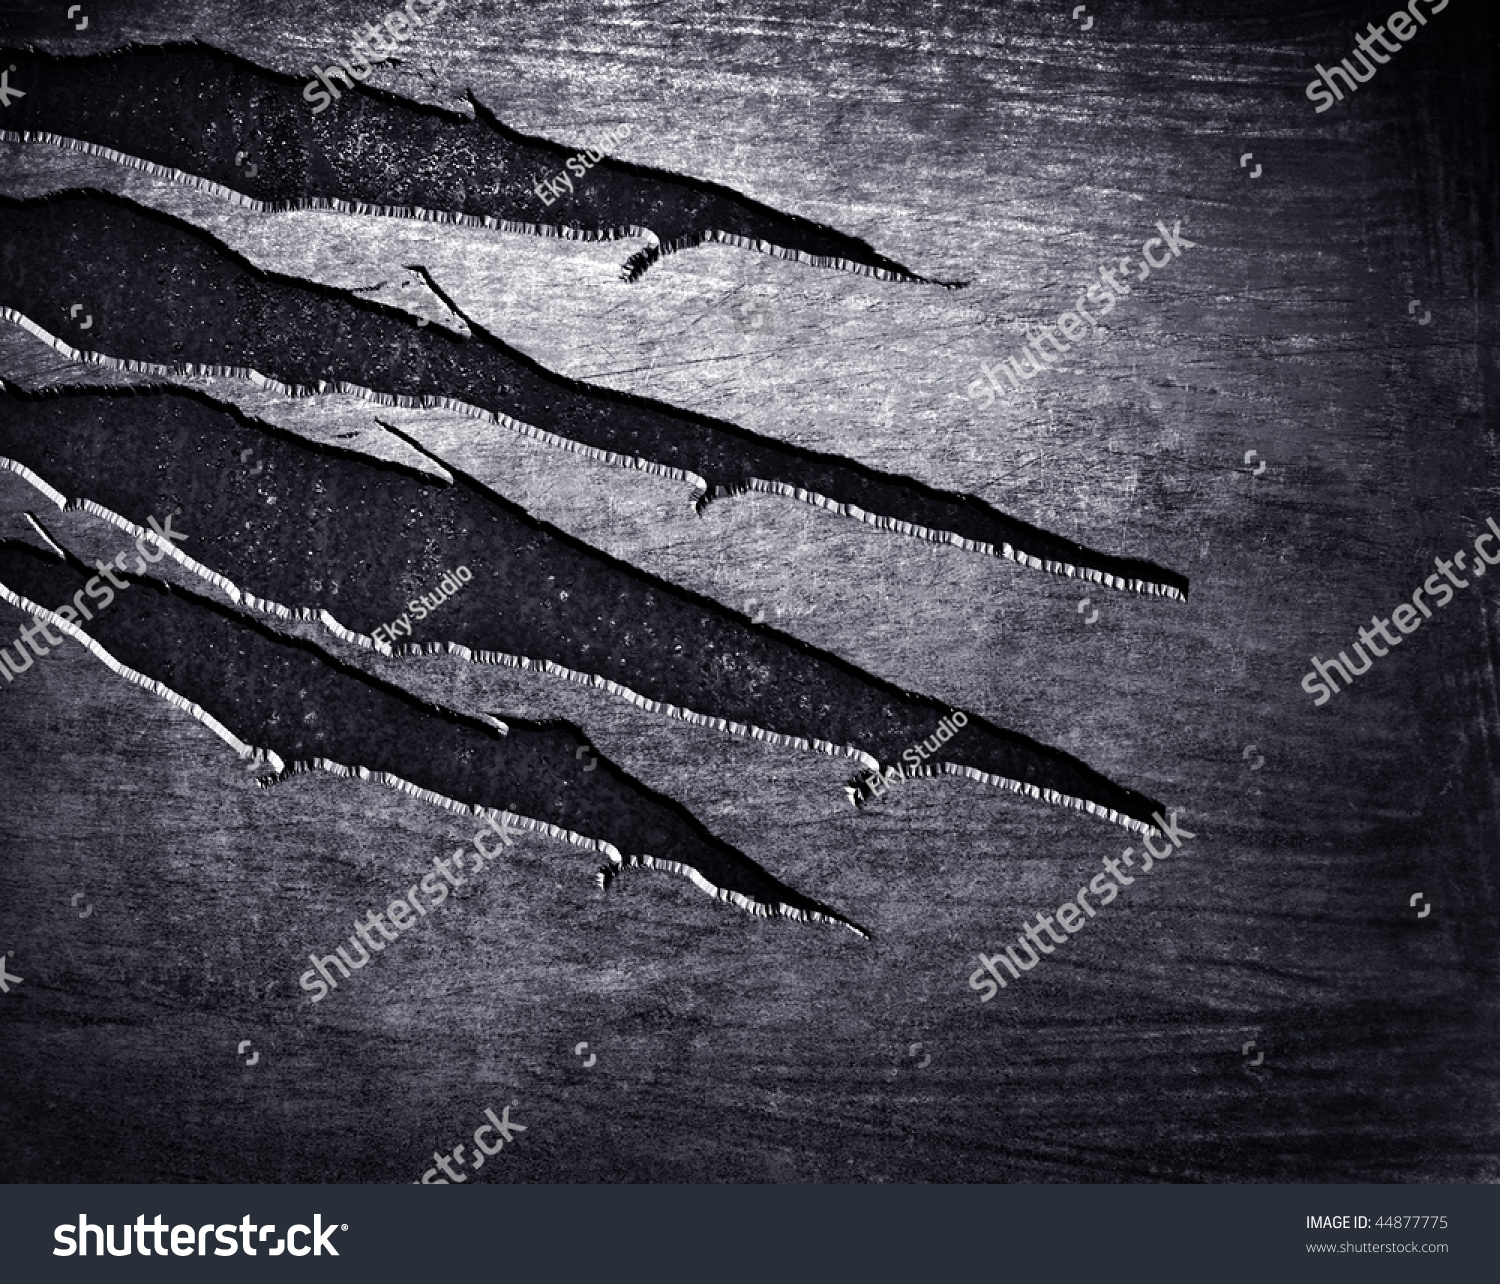 Scratched Metal Background Stock Photo 44877775 : Shutterstock